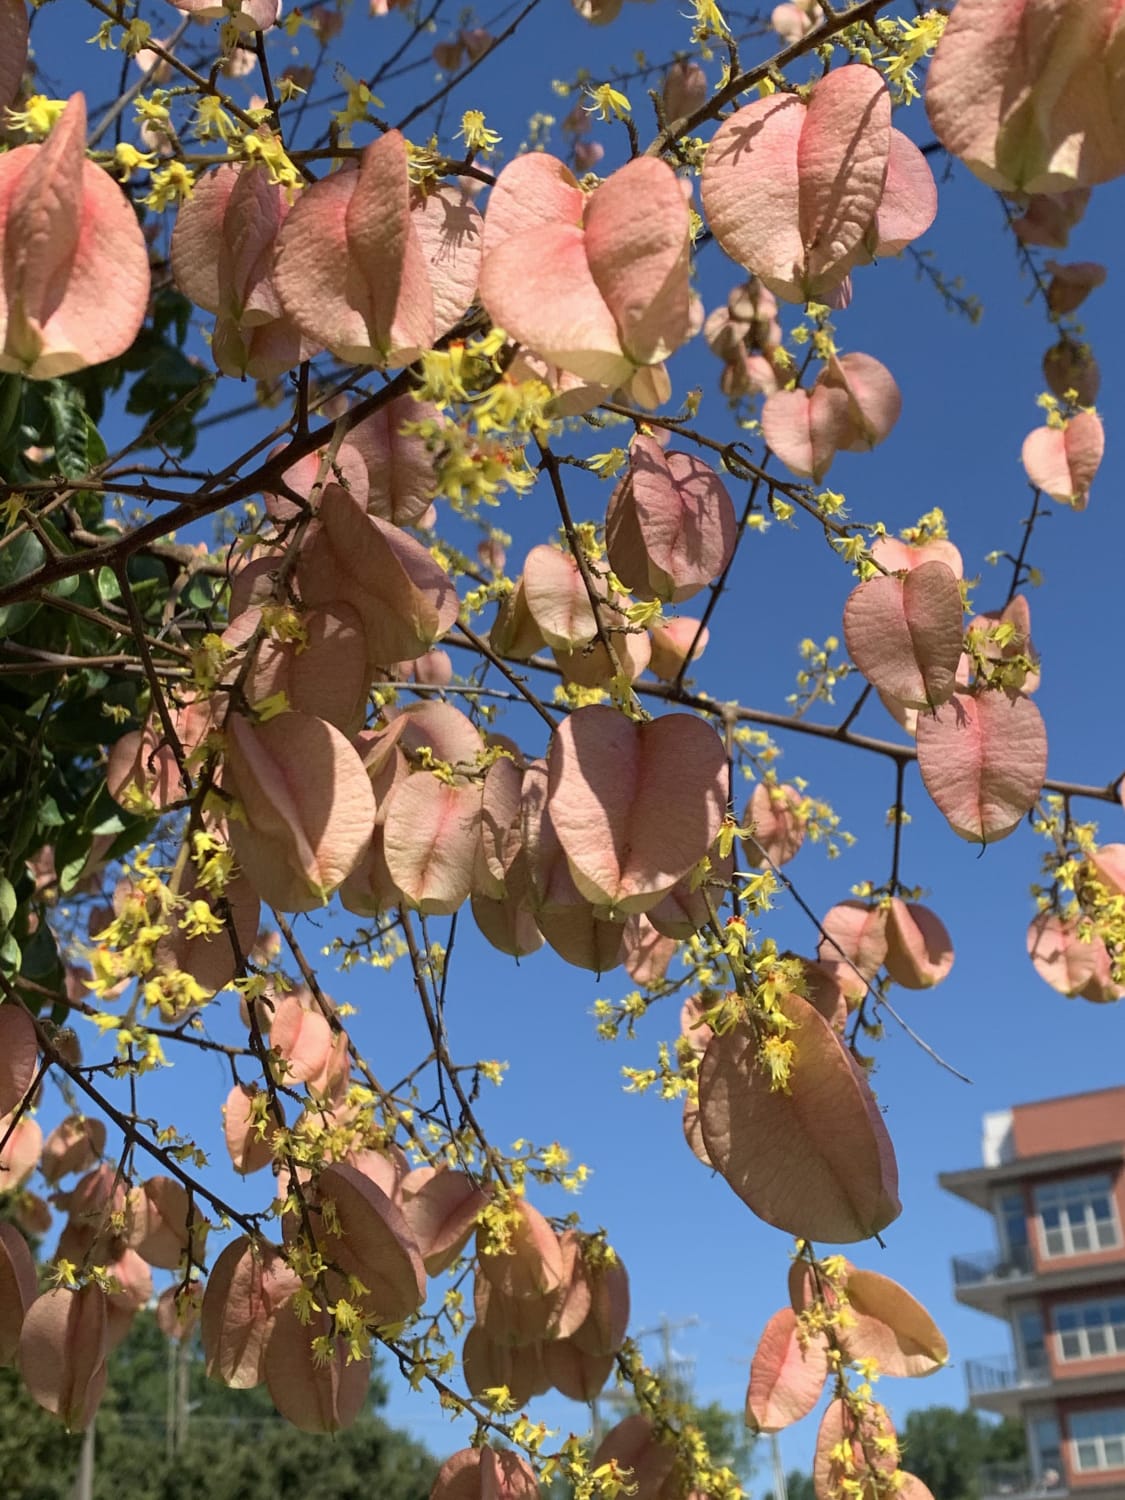 Found in a parking lot in North Carolina. Flowers feel kind of fuzzy. What is this tree?